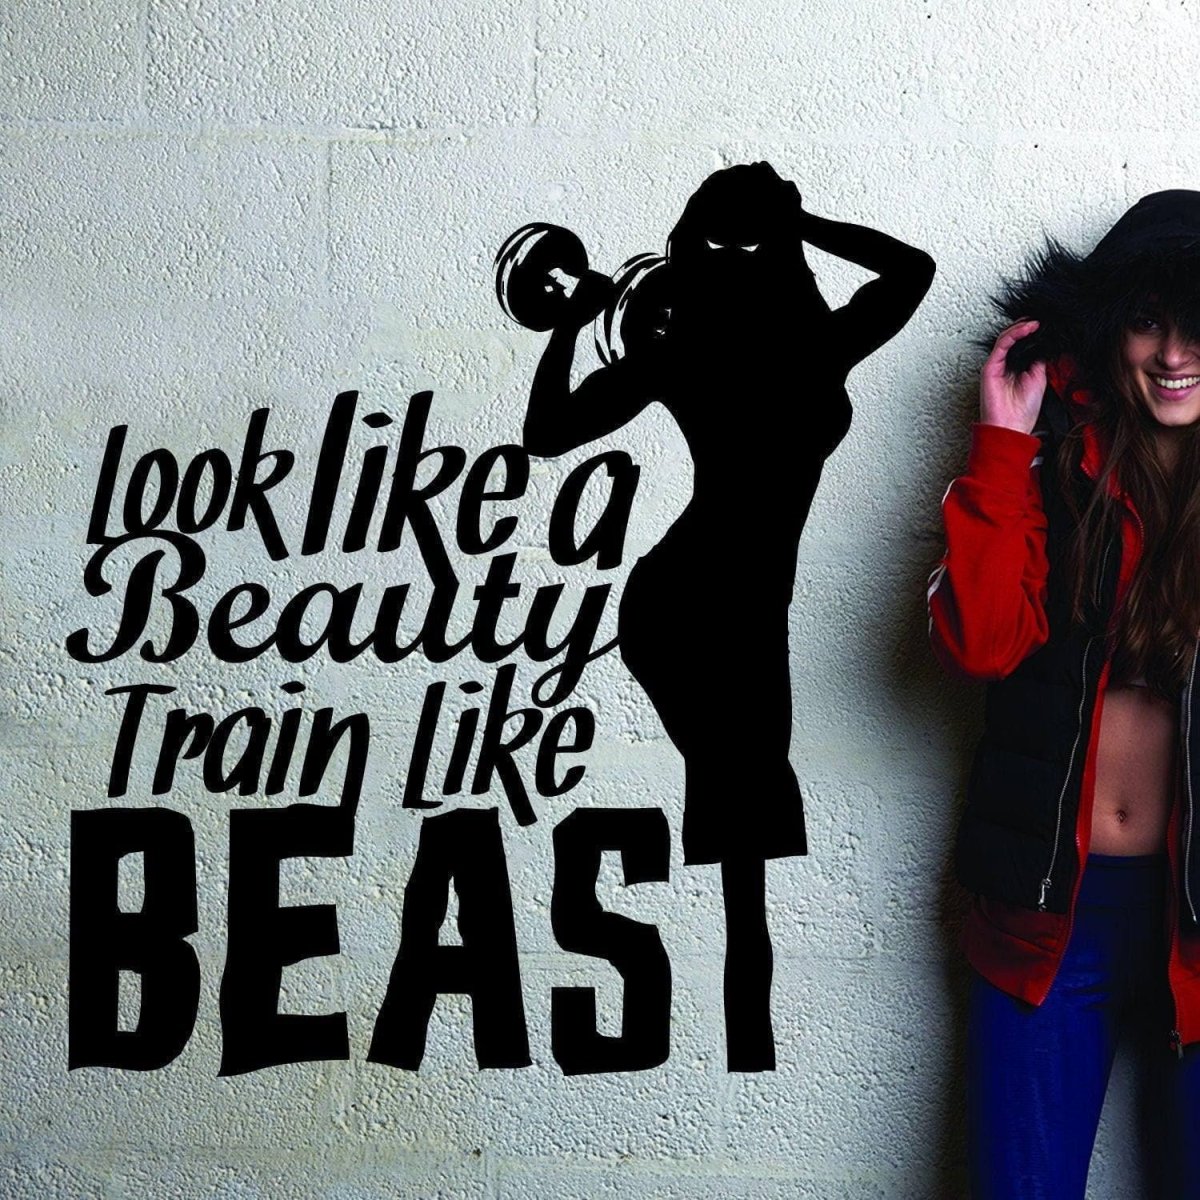 Inspirational Fitness Decal: Unleash Your Beast Mode! - Decords